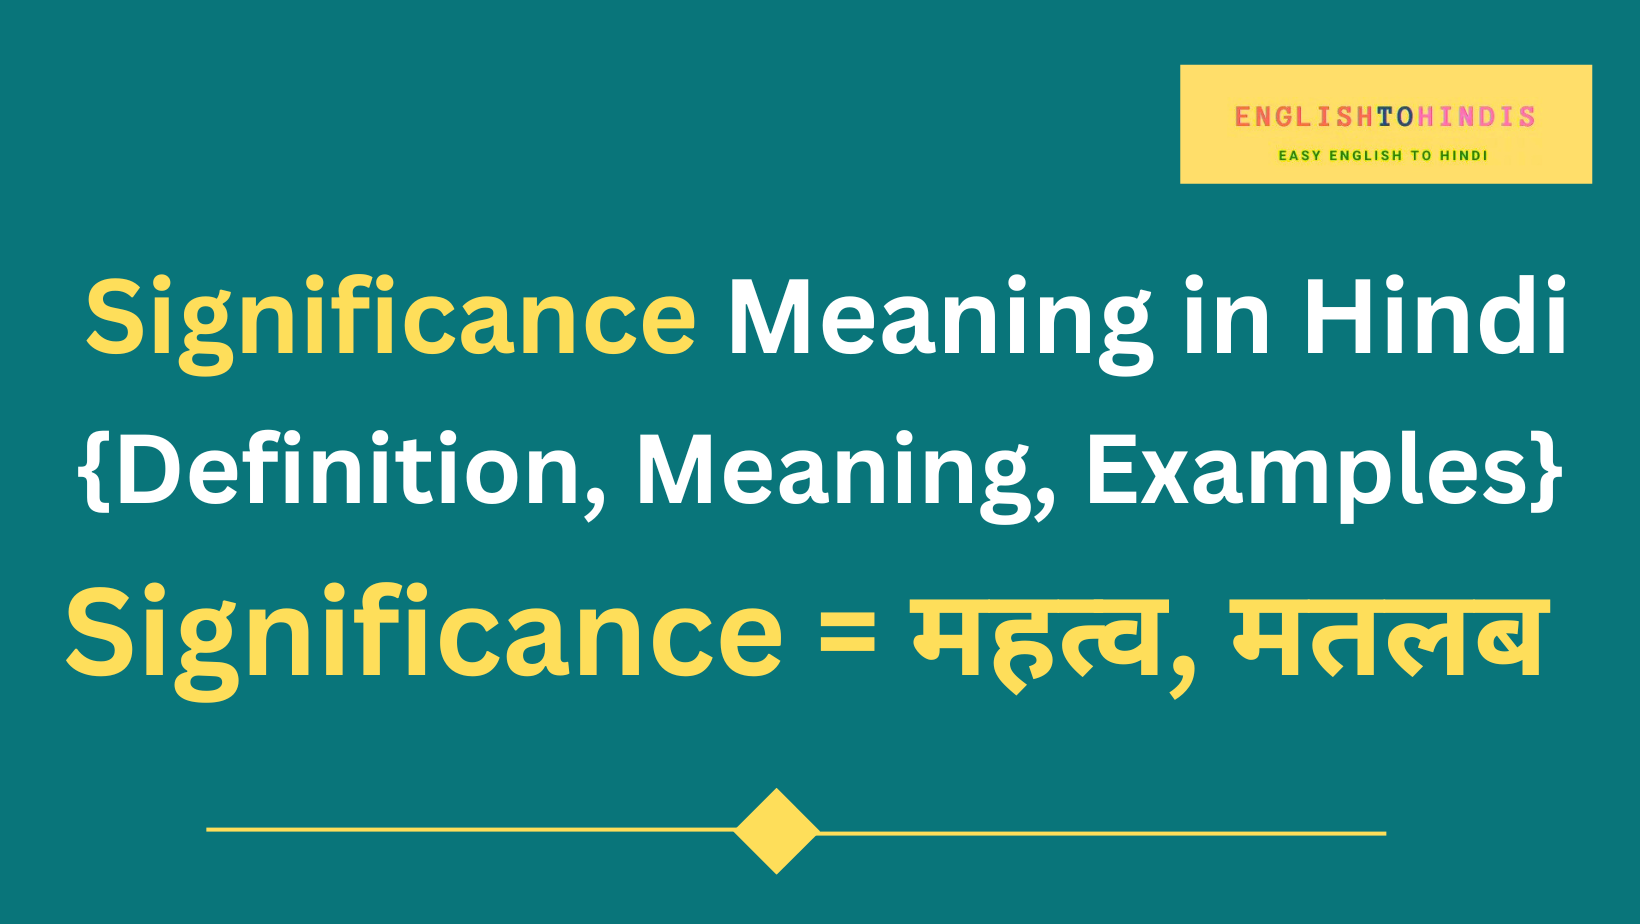 Significance Meaning in Hindi